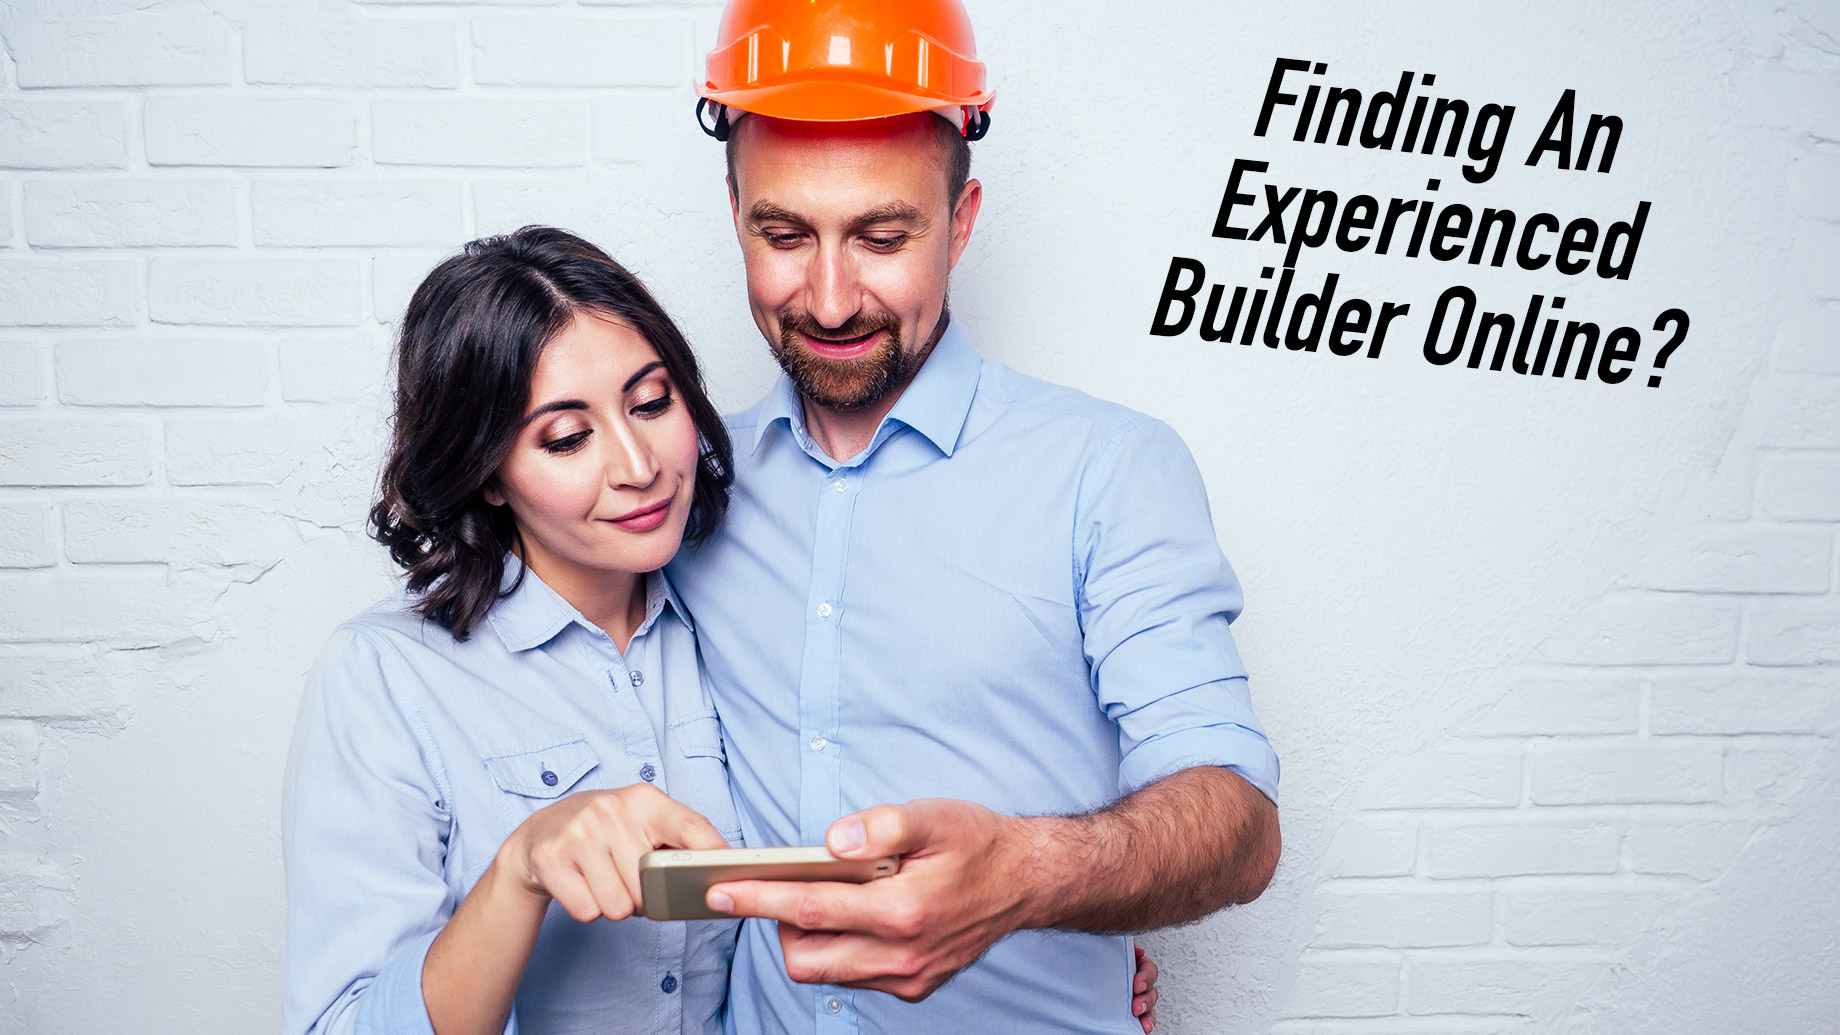 Finding An Experienced Builder Online? Consider These Tips First